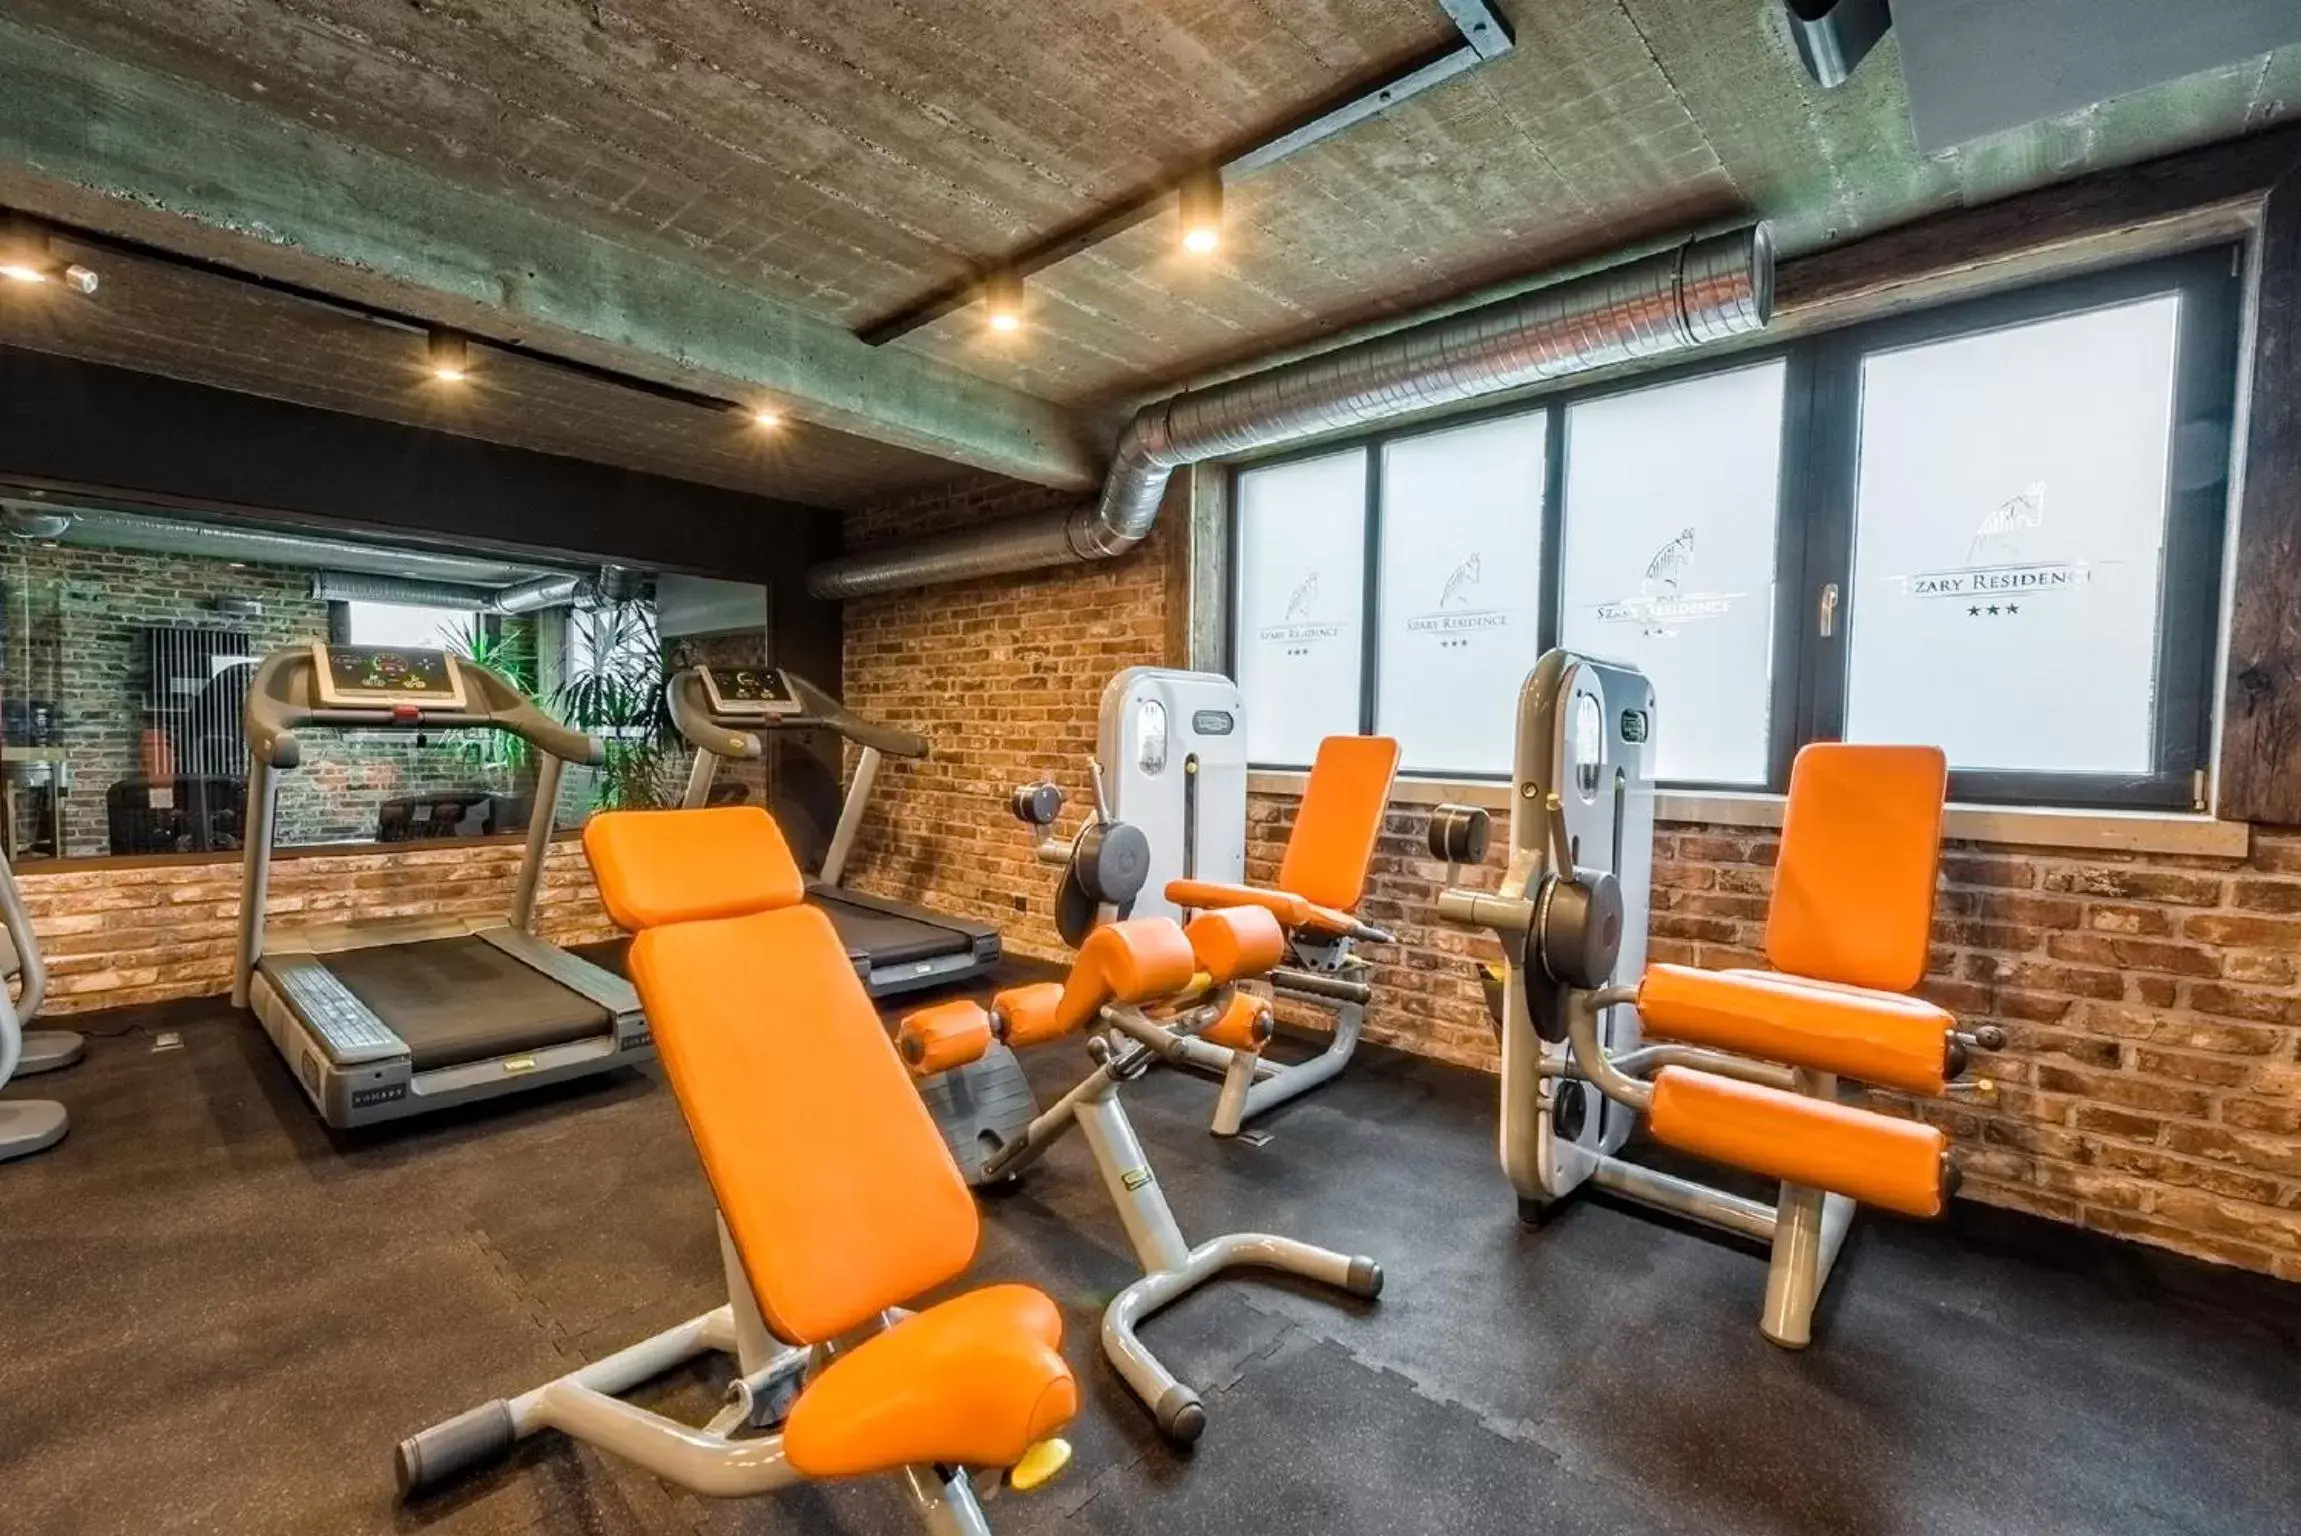 Fitness centre/facilities, Fitness Center/Facilities in Hotel Szary Residence